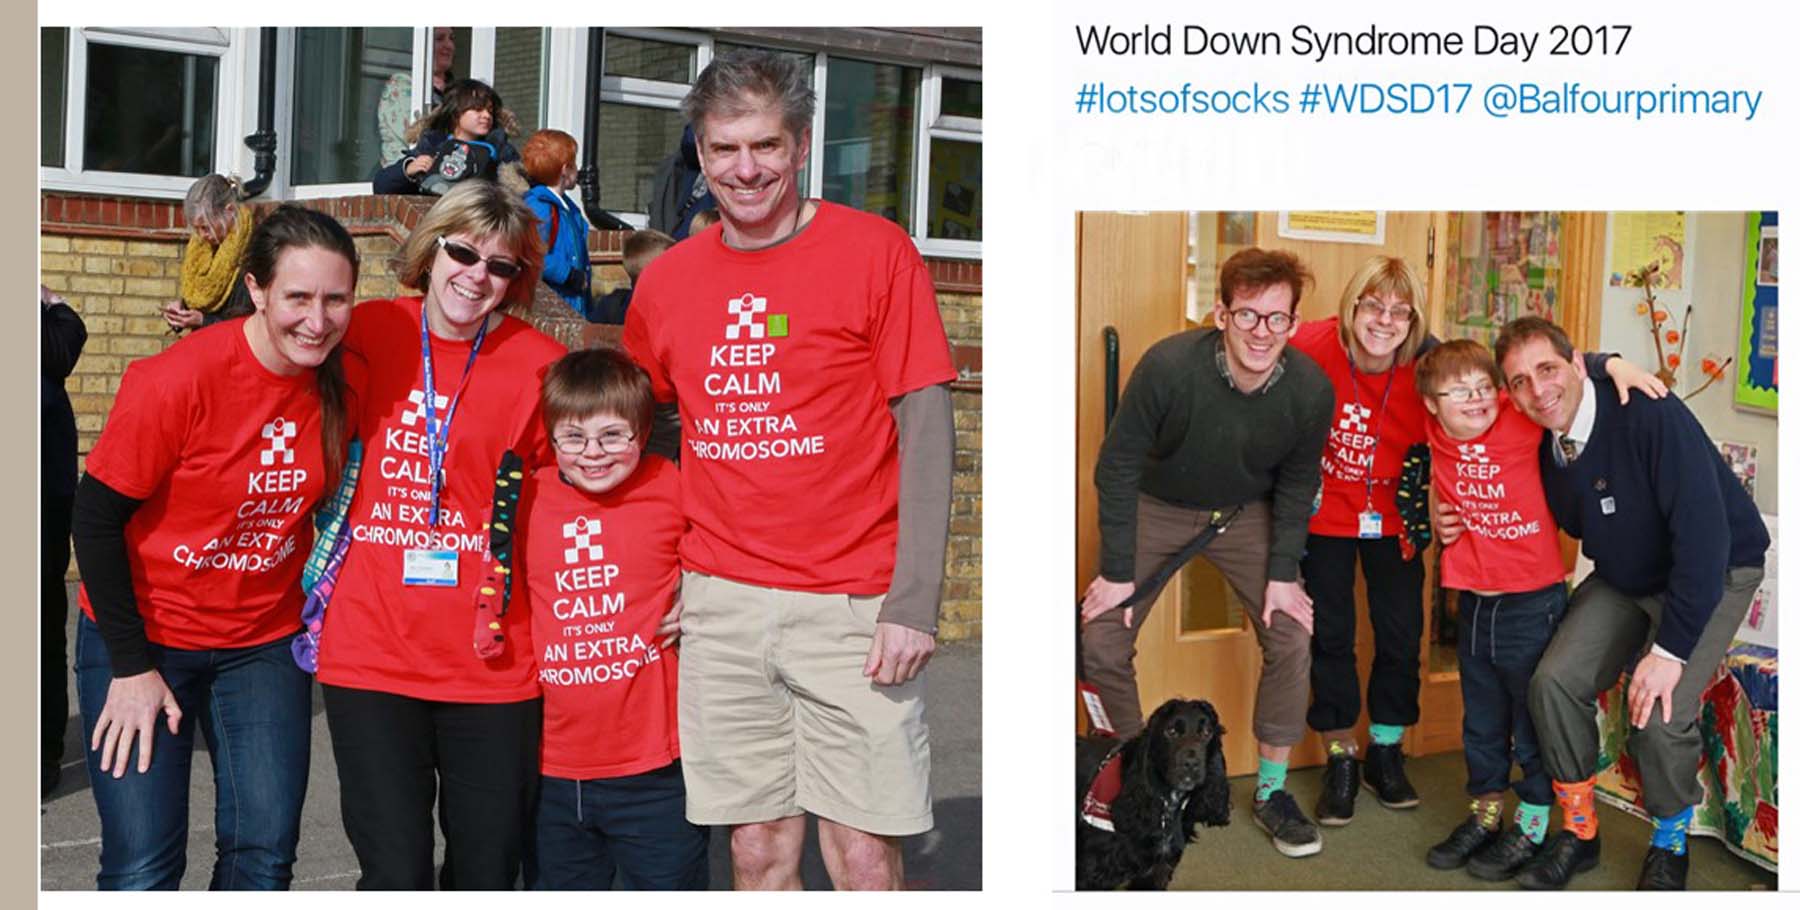 20170321 World Down's Syndrome Day Fund Raising at Balfour Primary School (Date = 3 x 21 Chromosomes!)